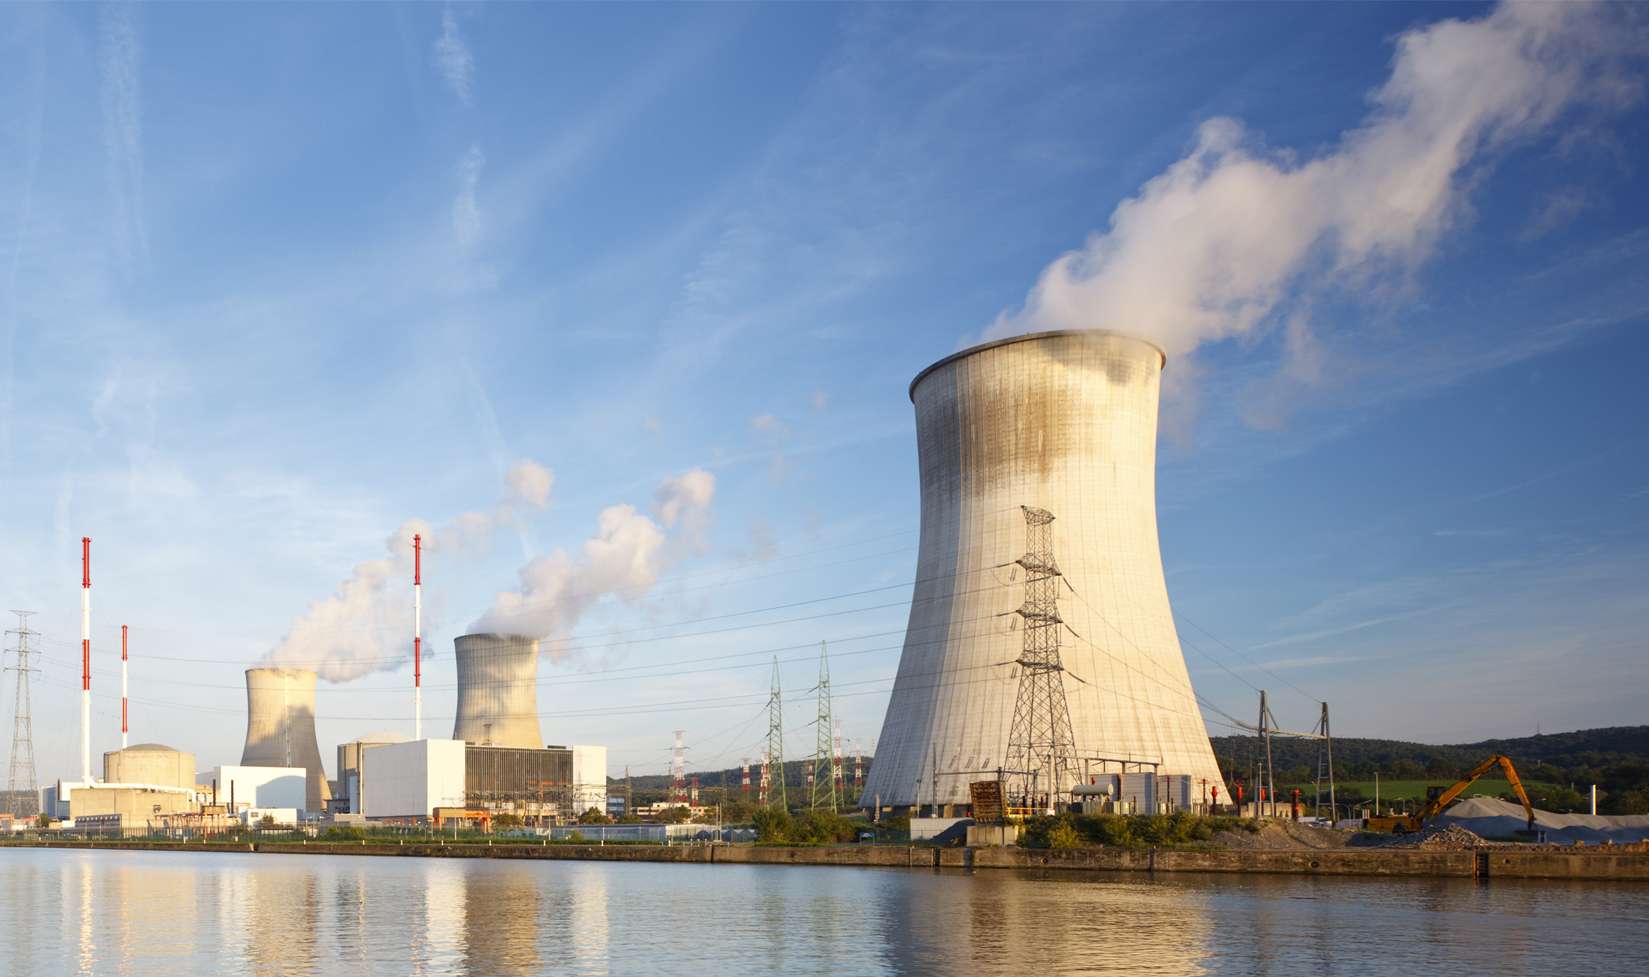 Nuclear Energy: A controversial solution to decarbonization